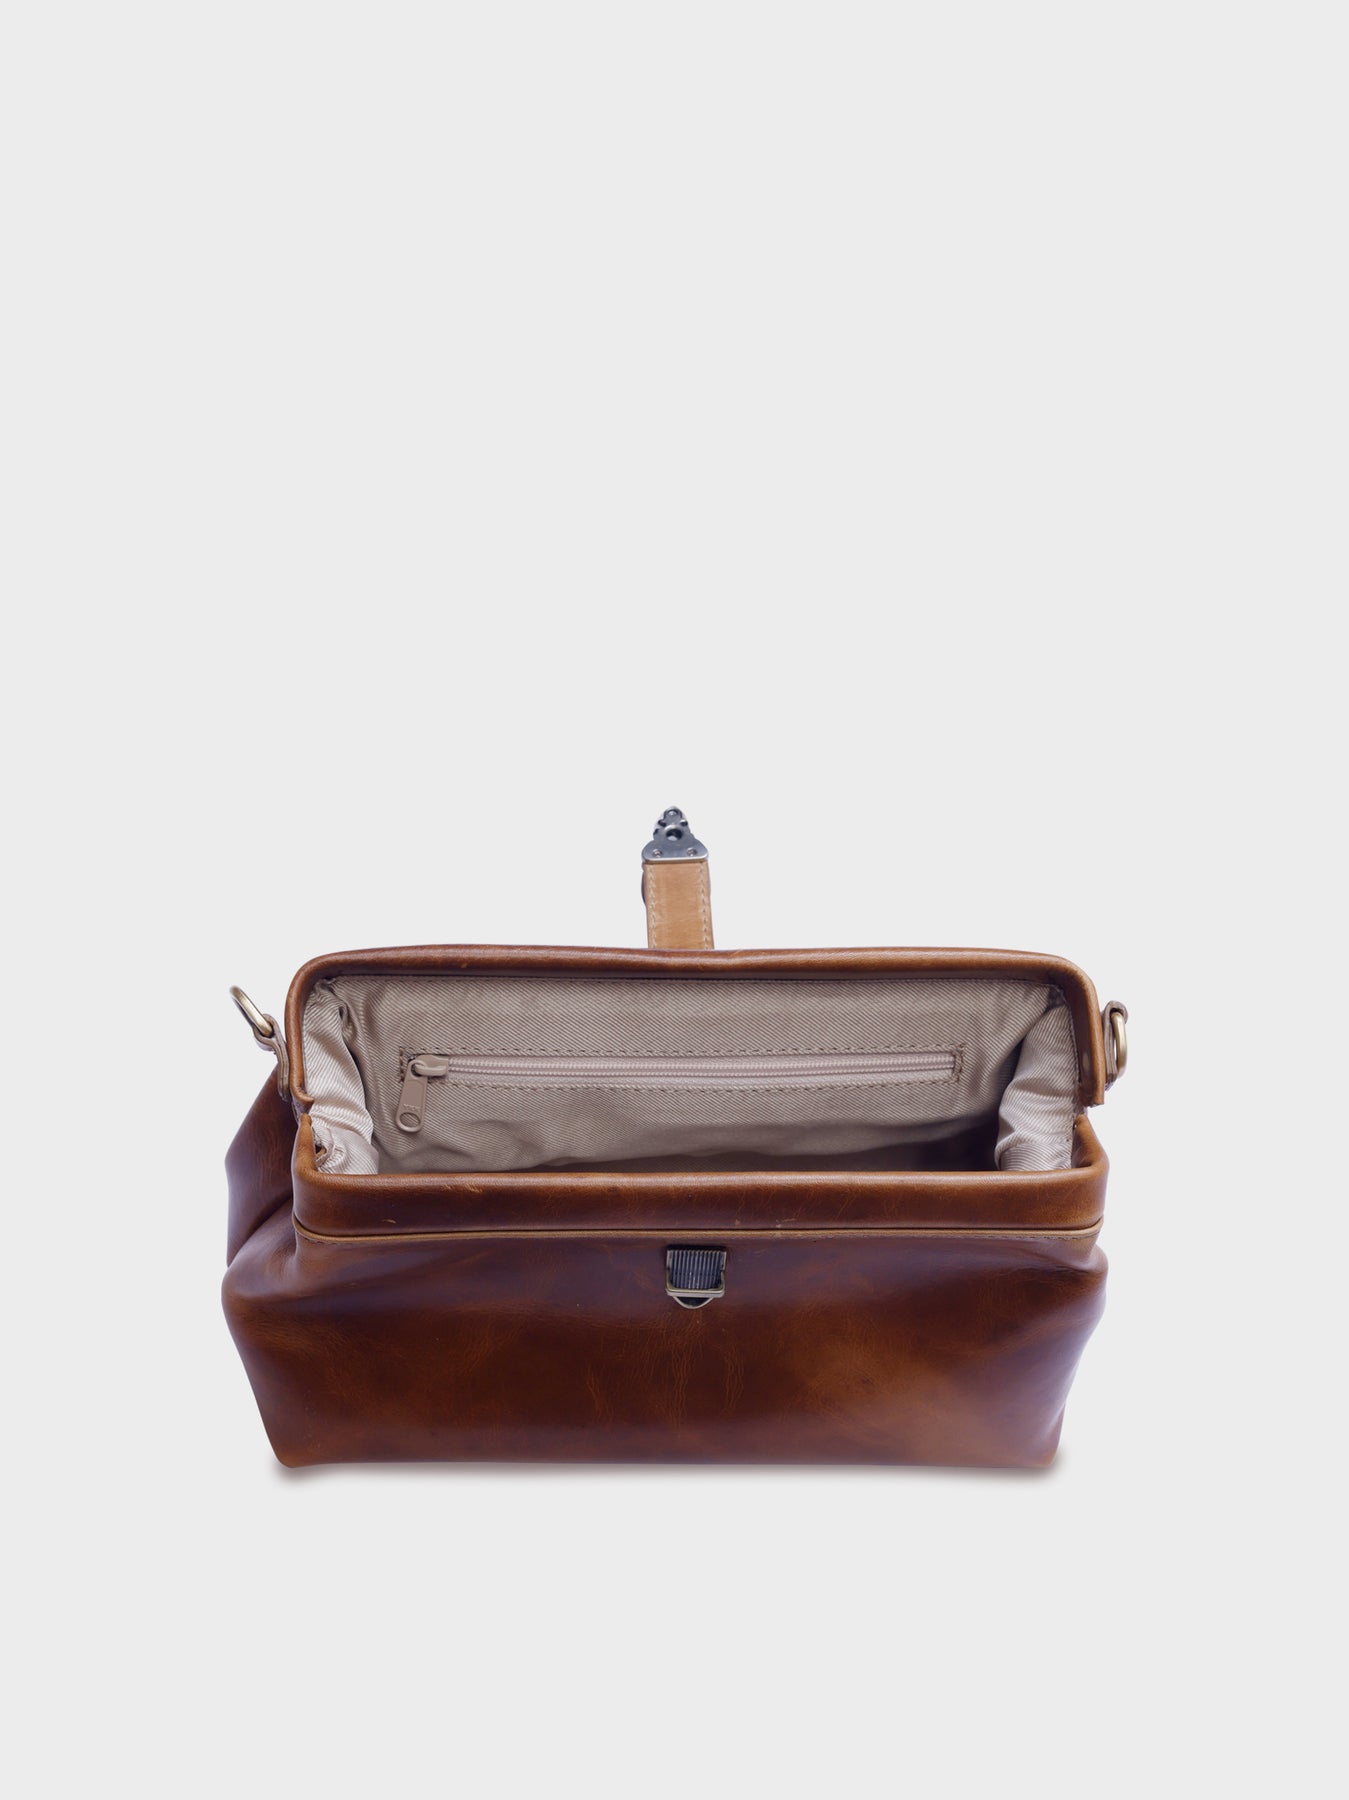 DOCTOR'S BAGS: CRAFTED FOR YOUR DAILY WORK - Original Tuscany